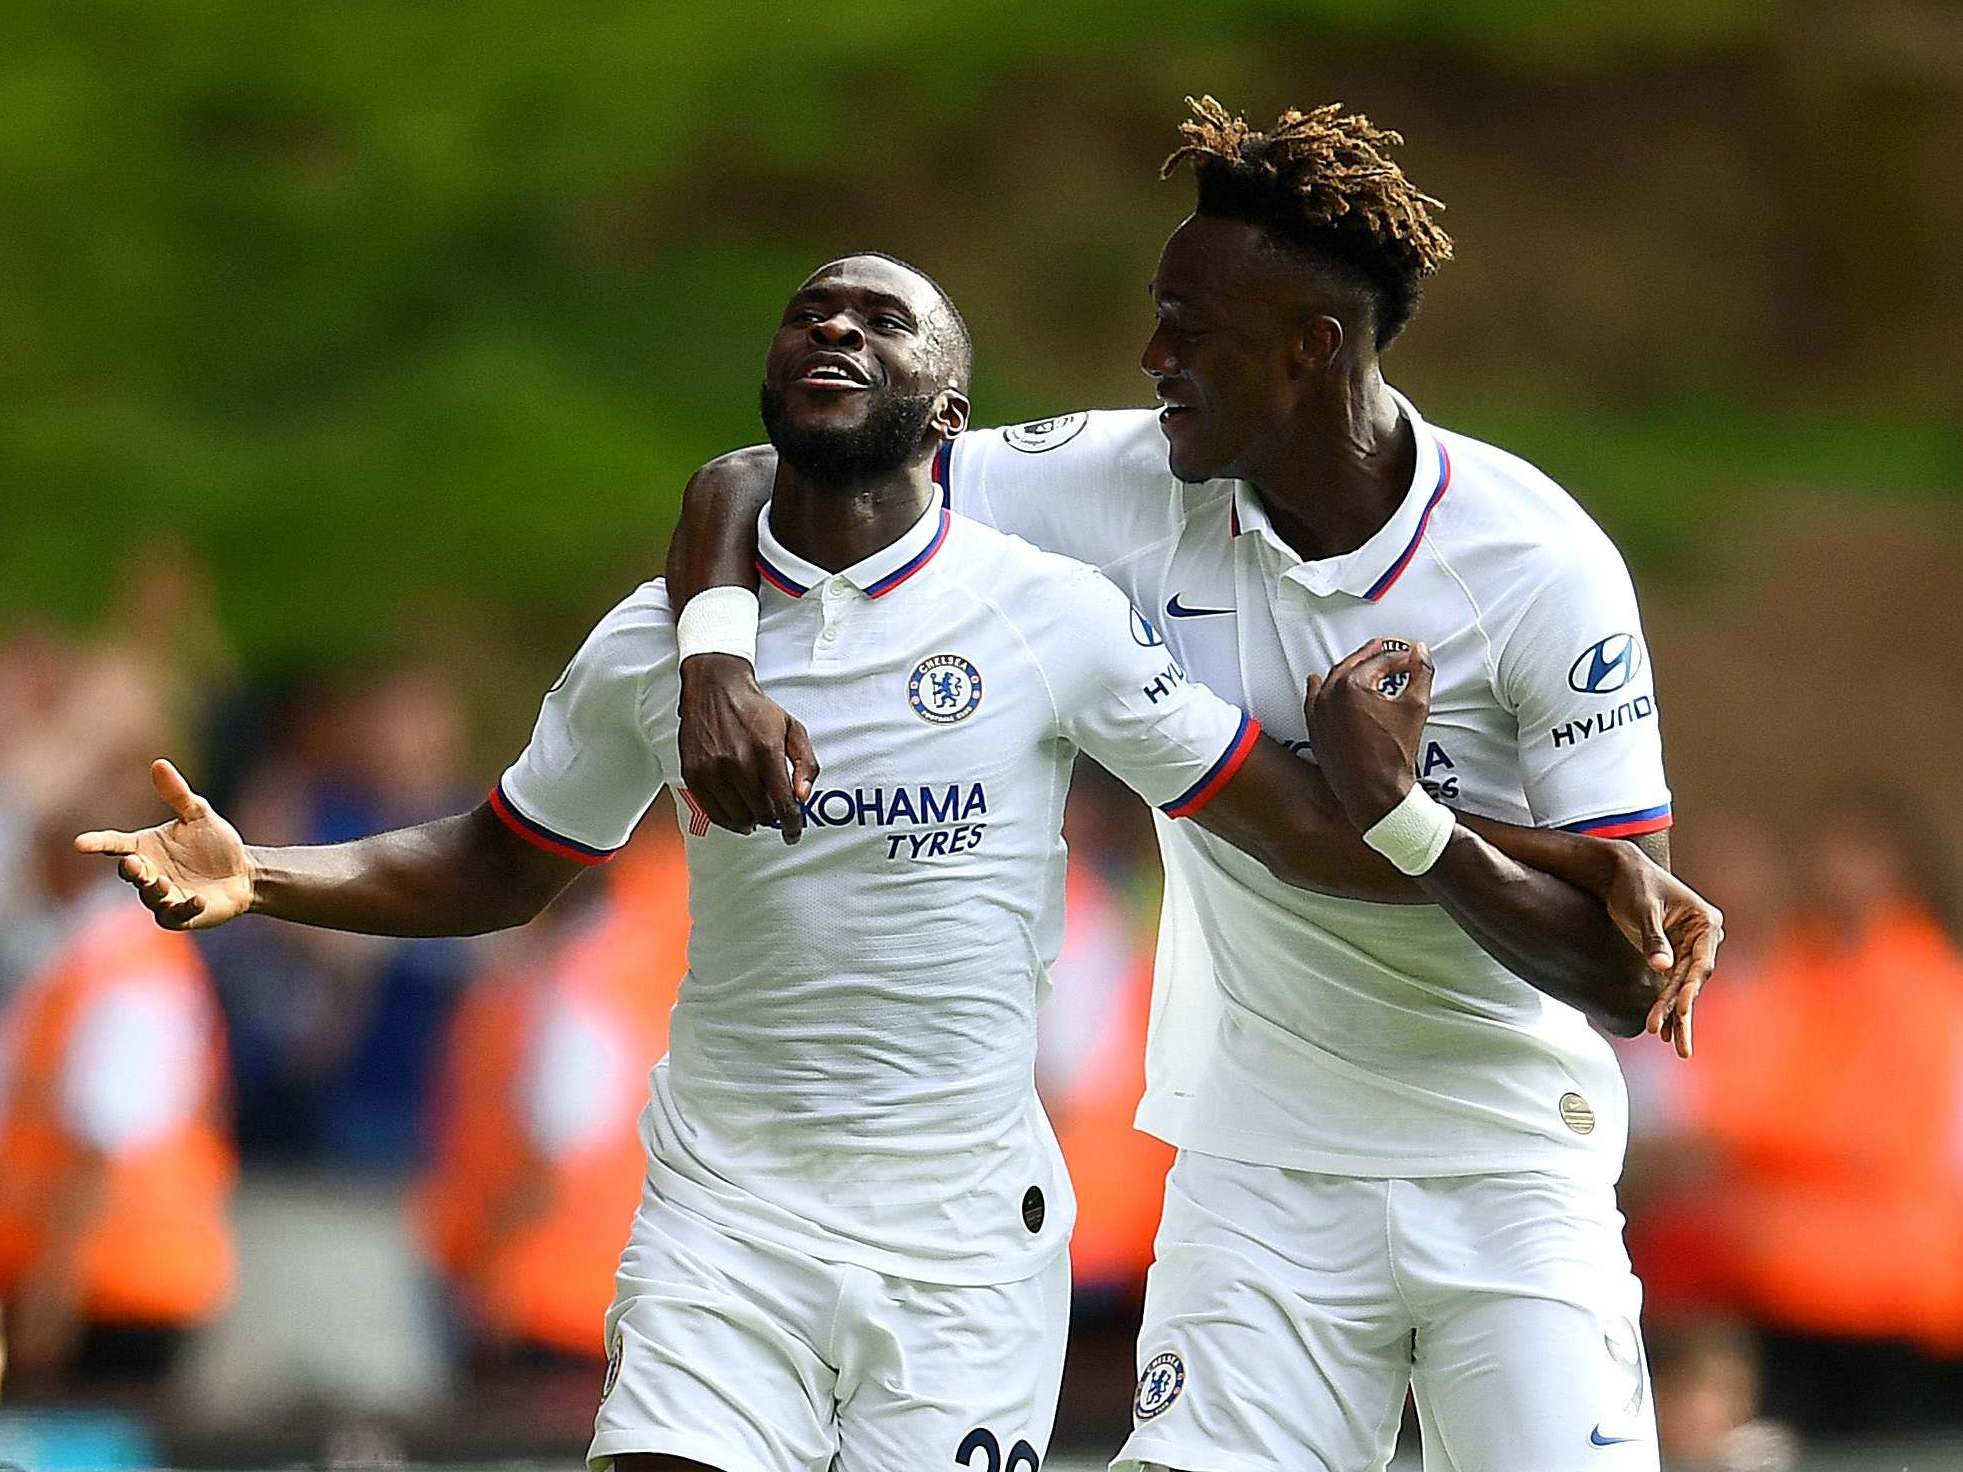 Fikayo Tomori and Tammy Abraham have broken into the Chelsea side